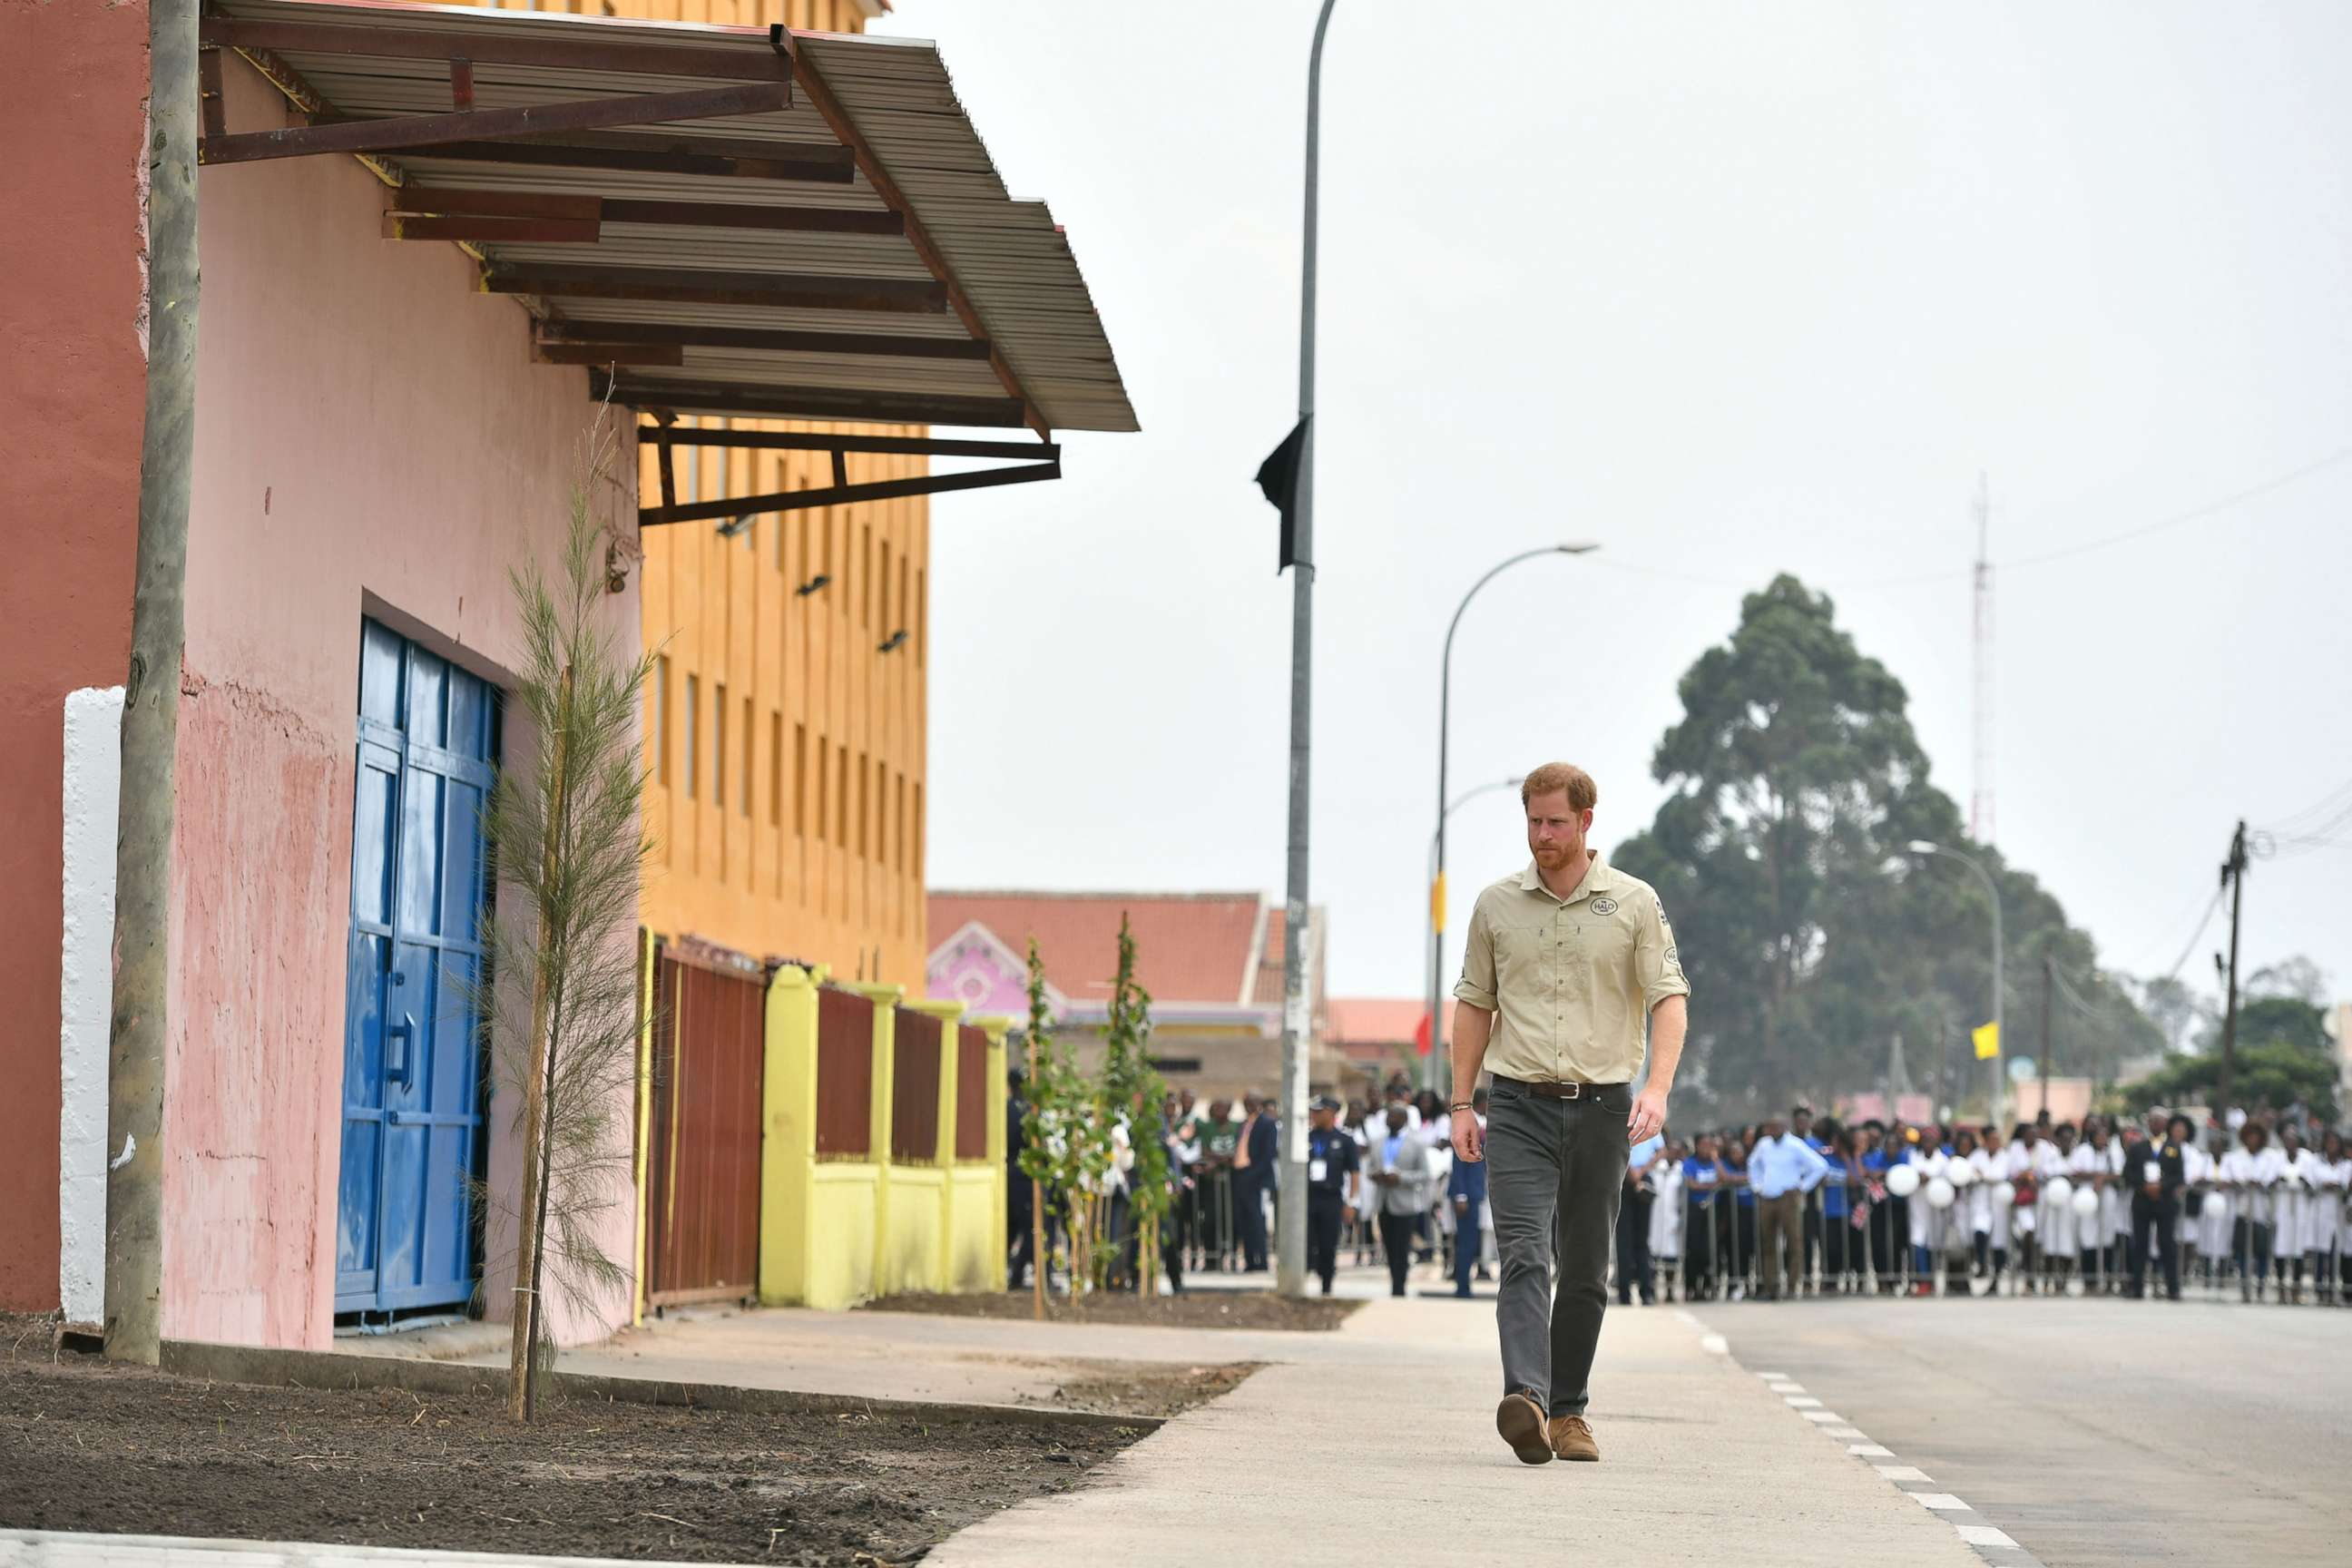 PHOTO: Prince Harry, Duke of Sussex on his way to visit The Diana Tree in Huambo, Angola, which marks the spot where the Princess of Wales was photographed in 1997, on day five of the royal tour of Africa on Sept. 27, 2019 in Dirico, Angola.